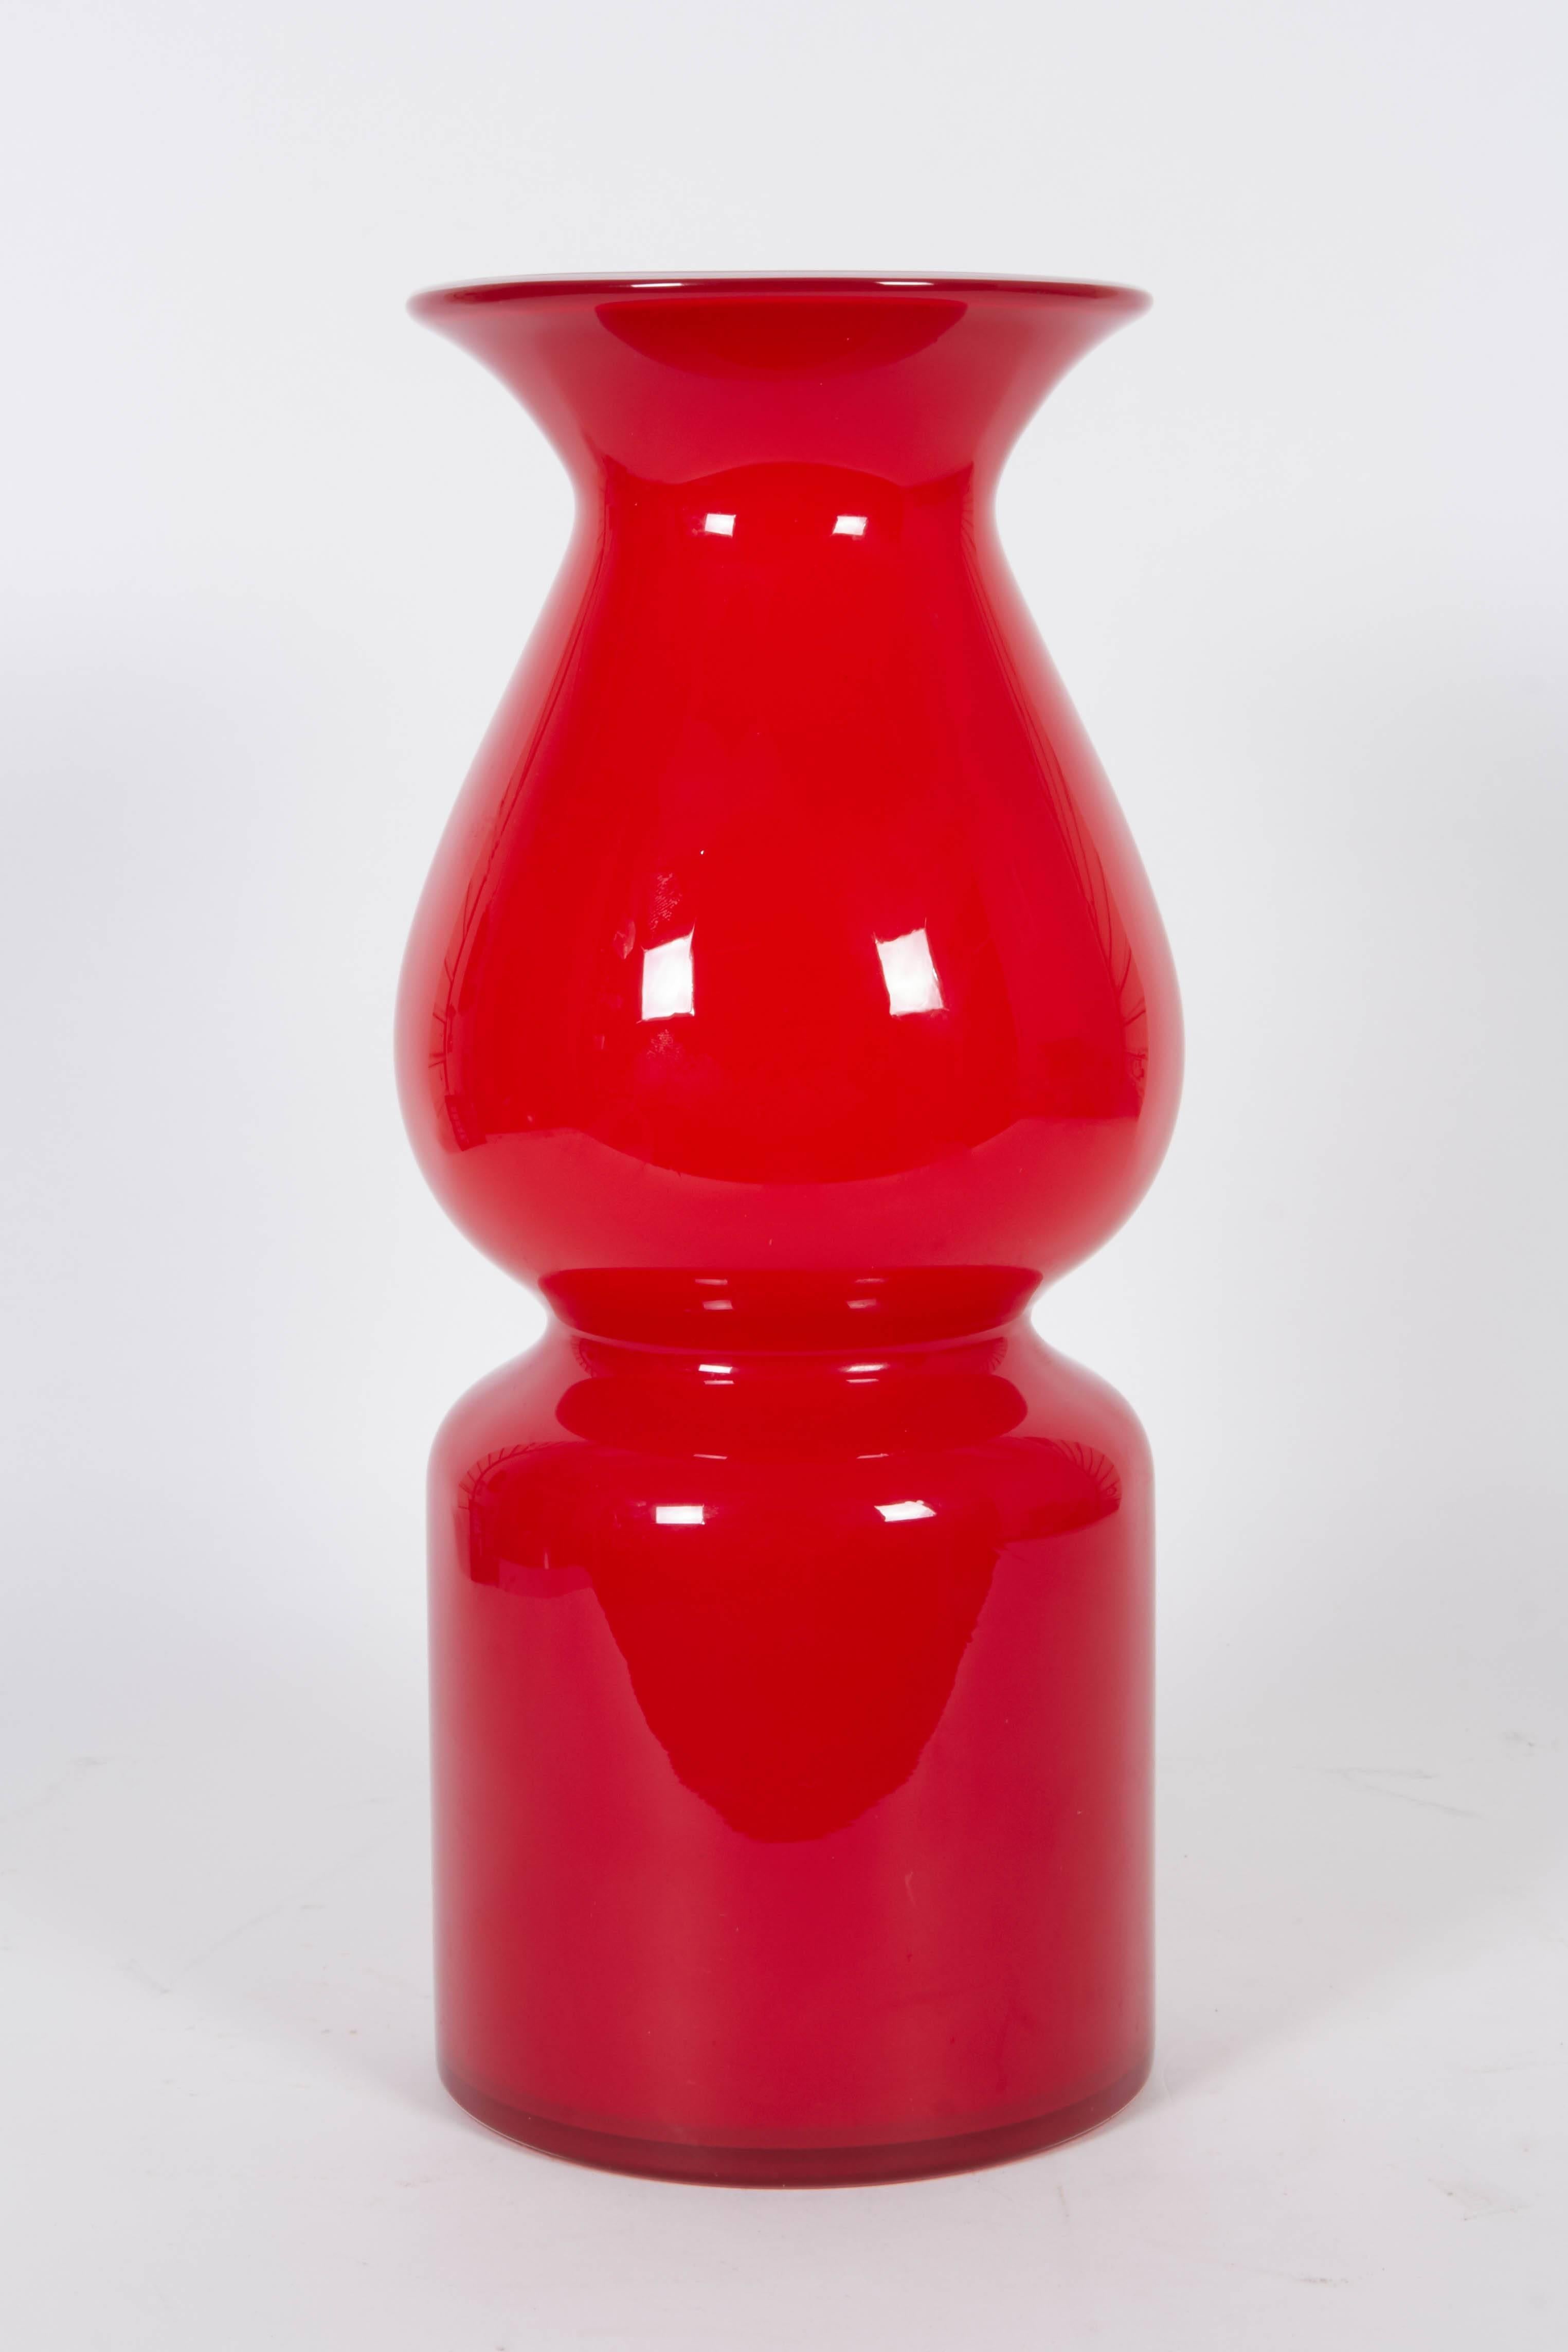 A Mid-Century Era vase designed in the manner of Per Lutken's 'Carnaby' line for Holmegaard, produced in Austria circa 1960s, of baluster form with flared rim in red cased glass. Excellent condition, consistent with age and use.

11062